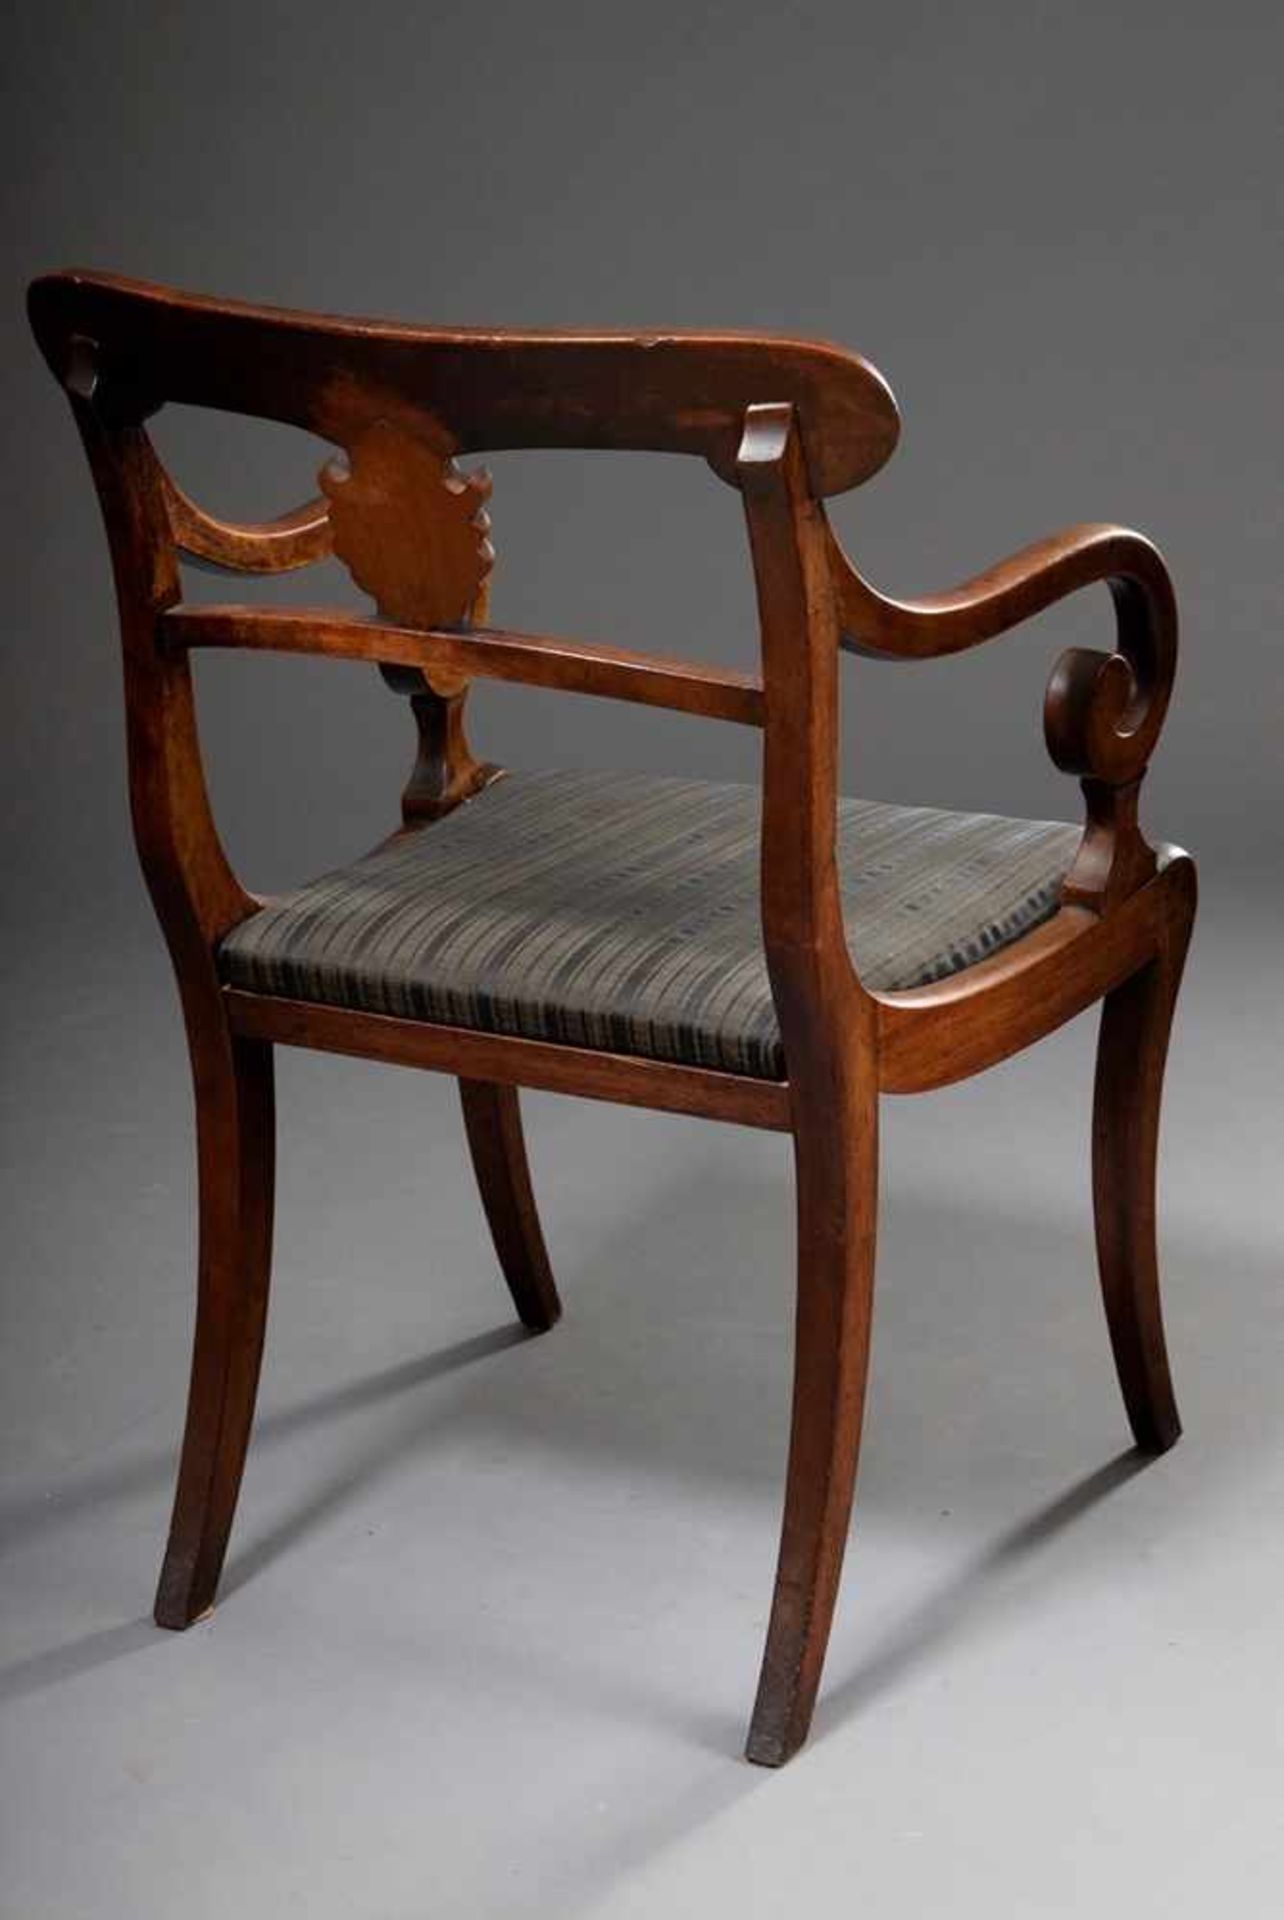 5 English Sheraton chairs with carved backrests and sabre legs, 1x with armrests, mahogany, - Image 6 of 7